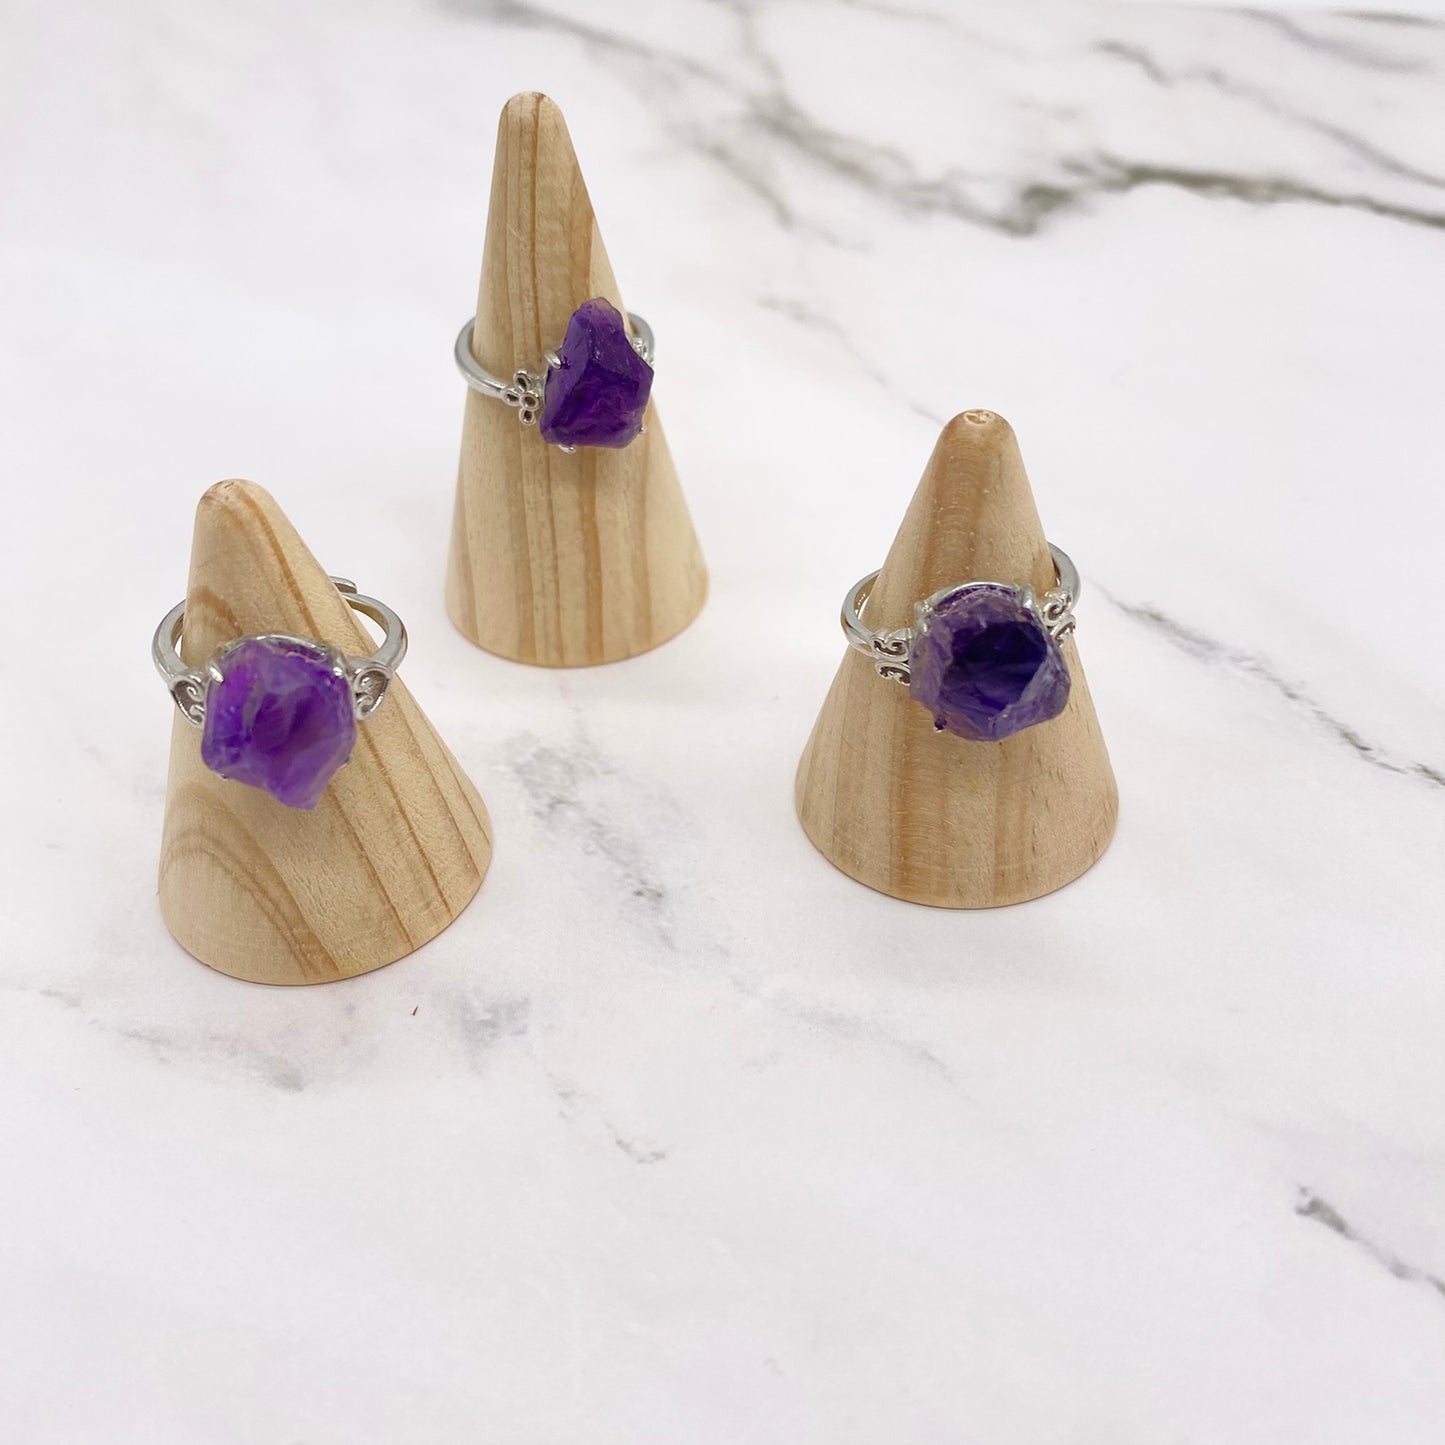 Amethyst Ring, Raw Crystal Ring, Gemstone Jewelry, Handmade Rings, Bohemian Jewelry, Cute Women Ring, Gift For Her, Statement Ring